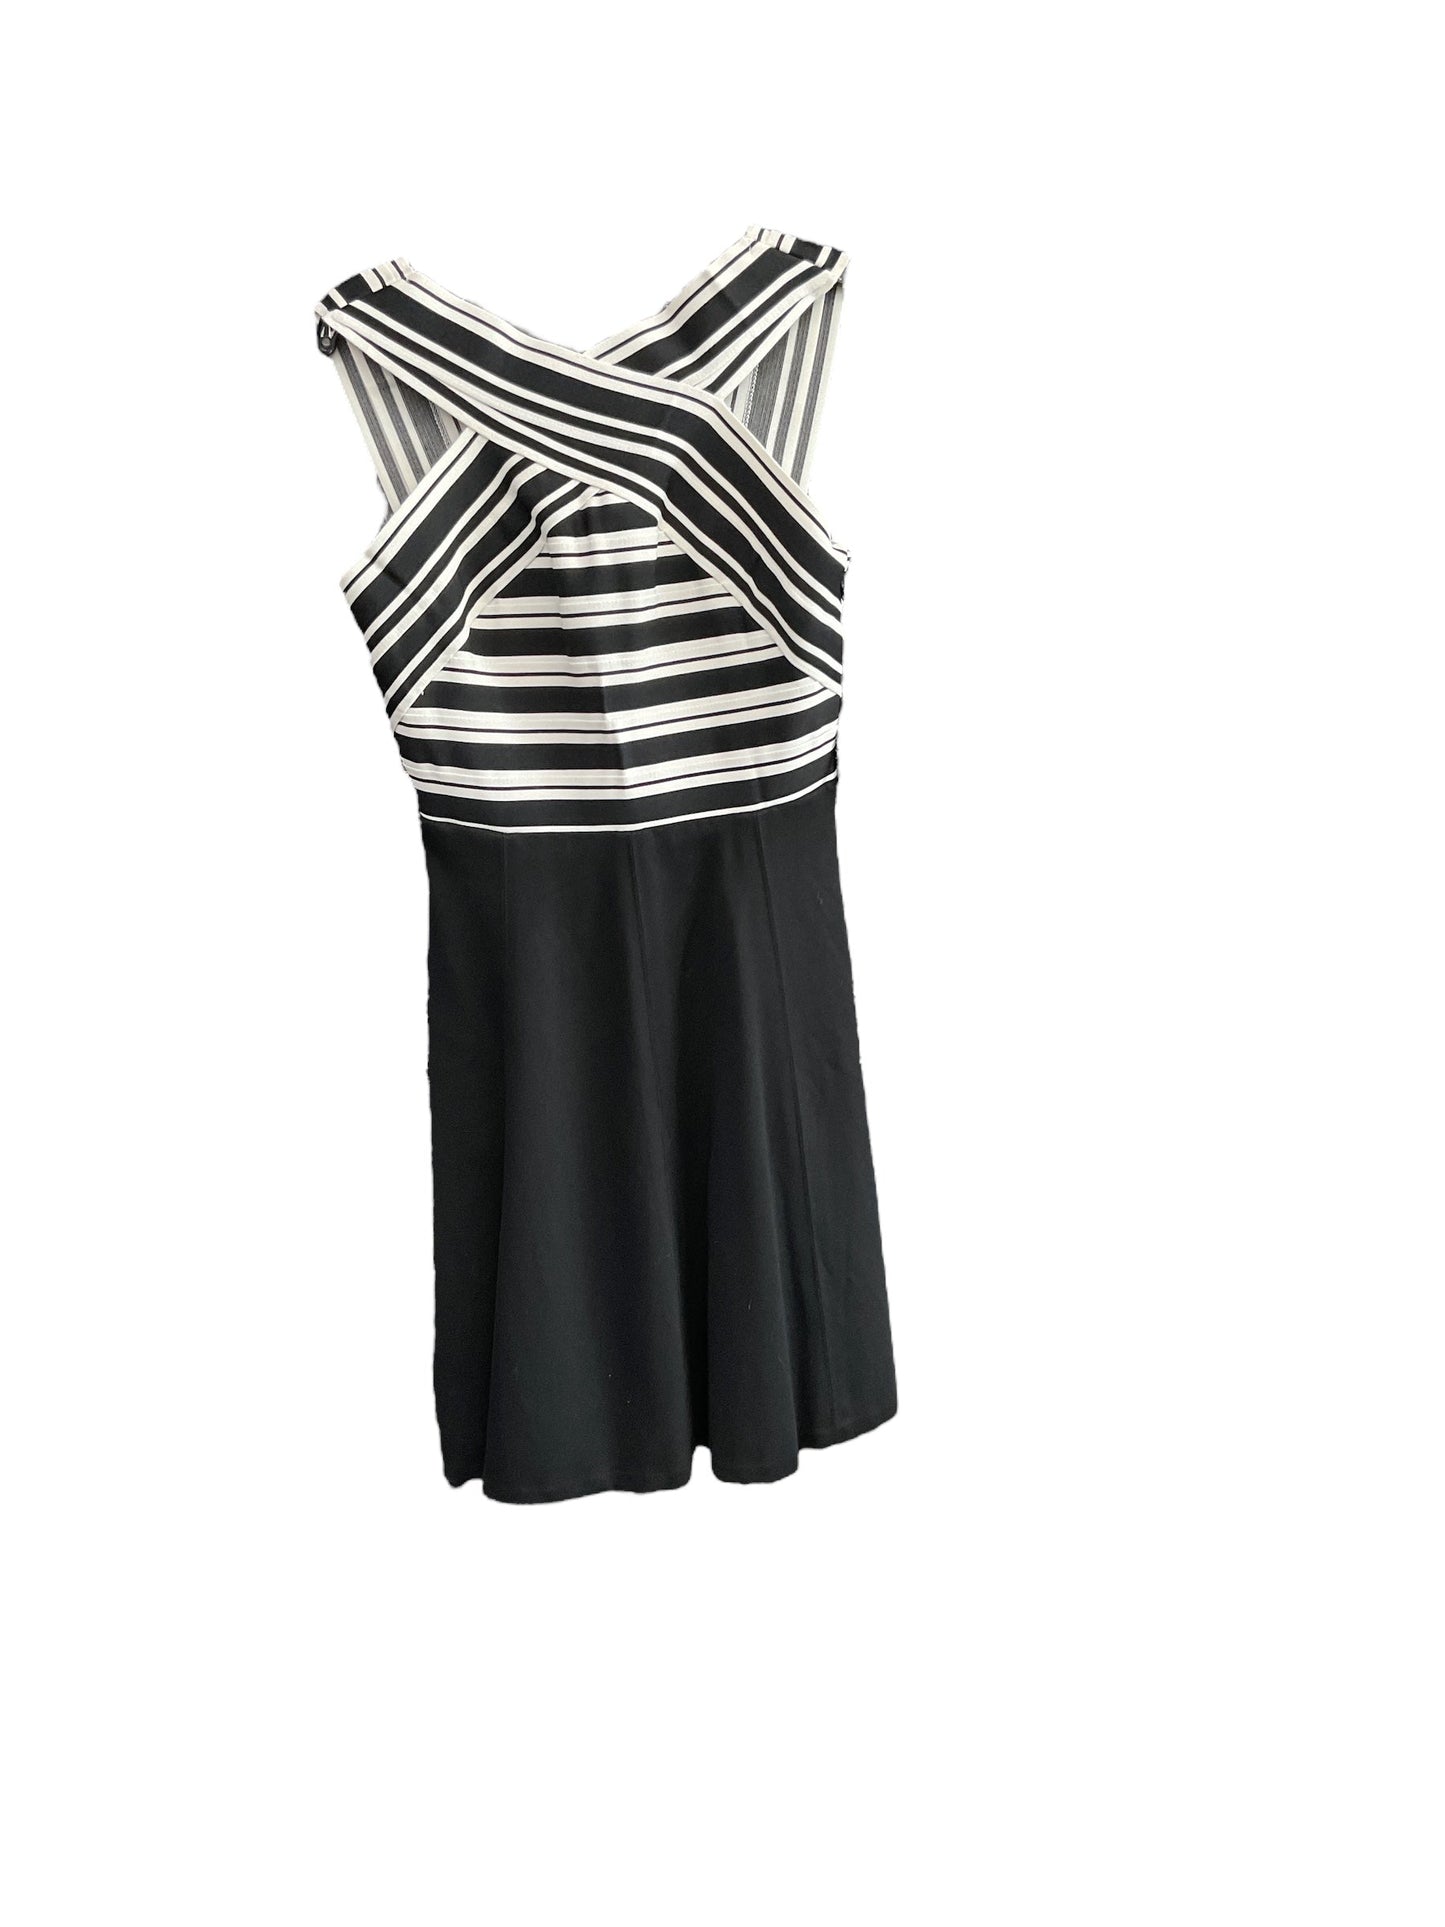 Black Top Sleeveless Vince Camuto, Size M